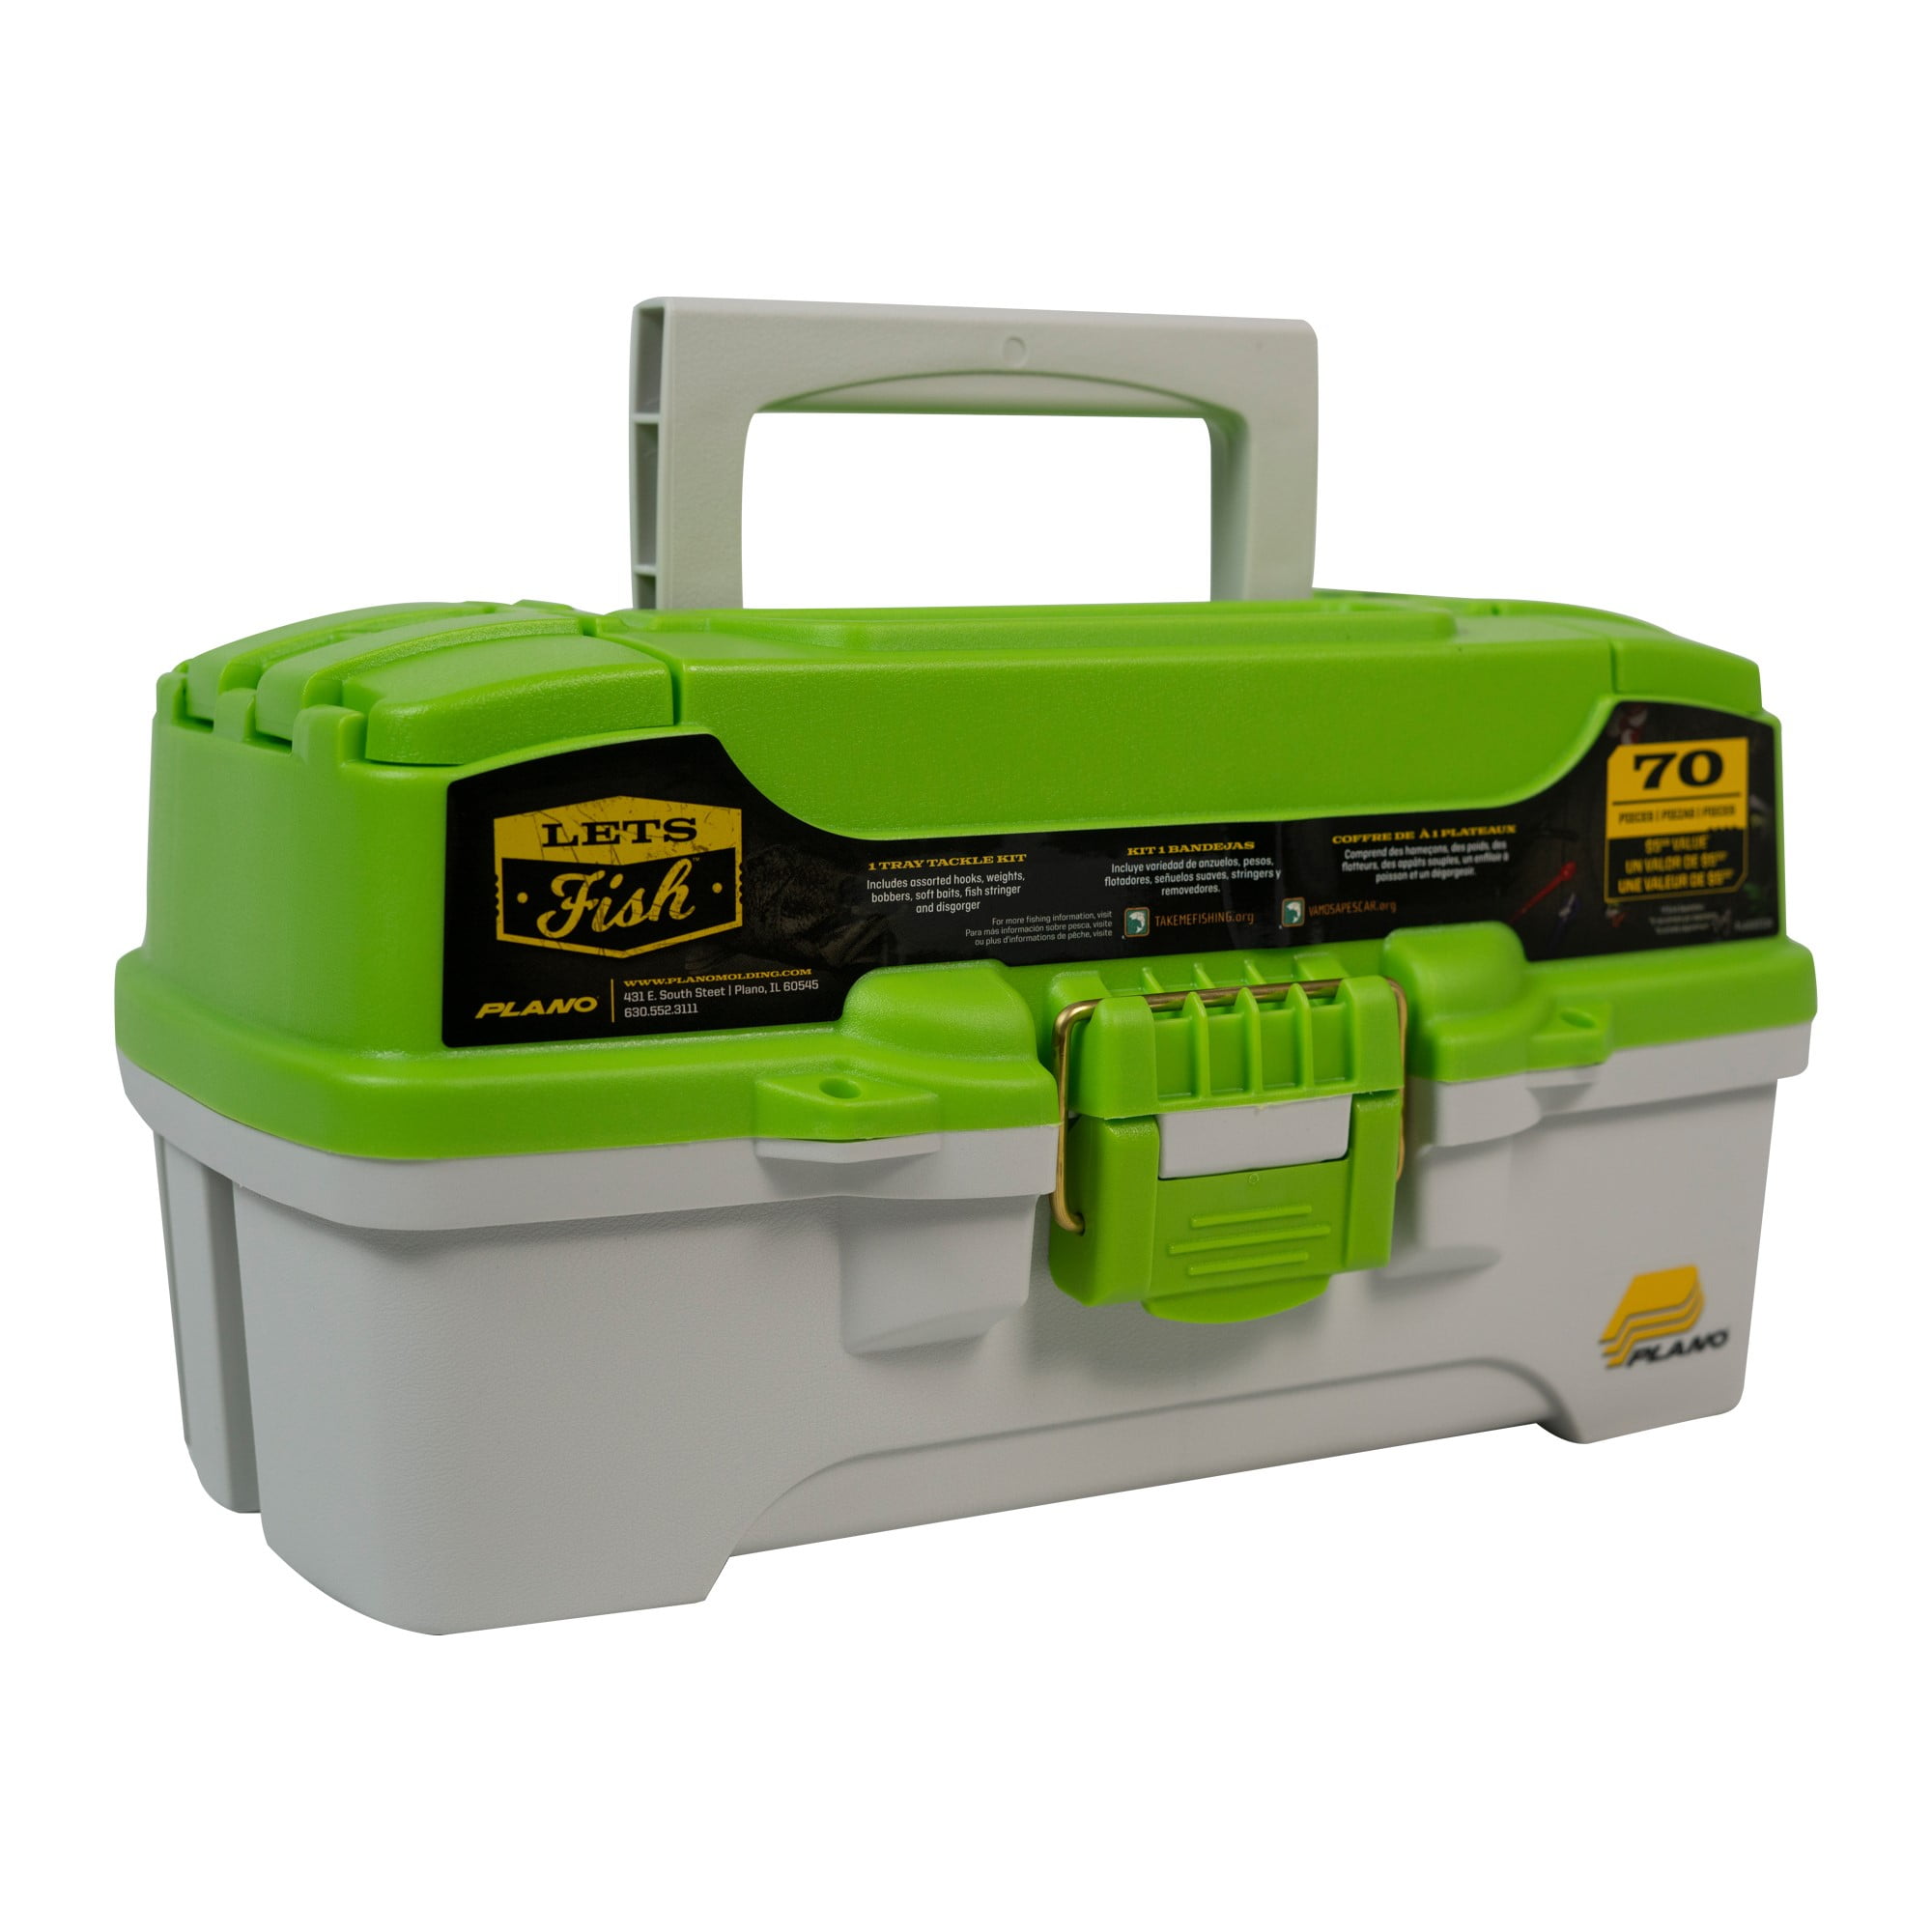 Plano Let's Fish! One-Tray Tackle Box With 70 PC Tackle Kit